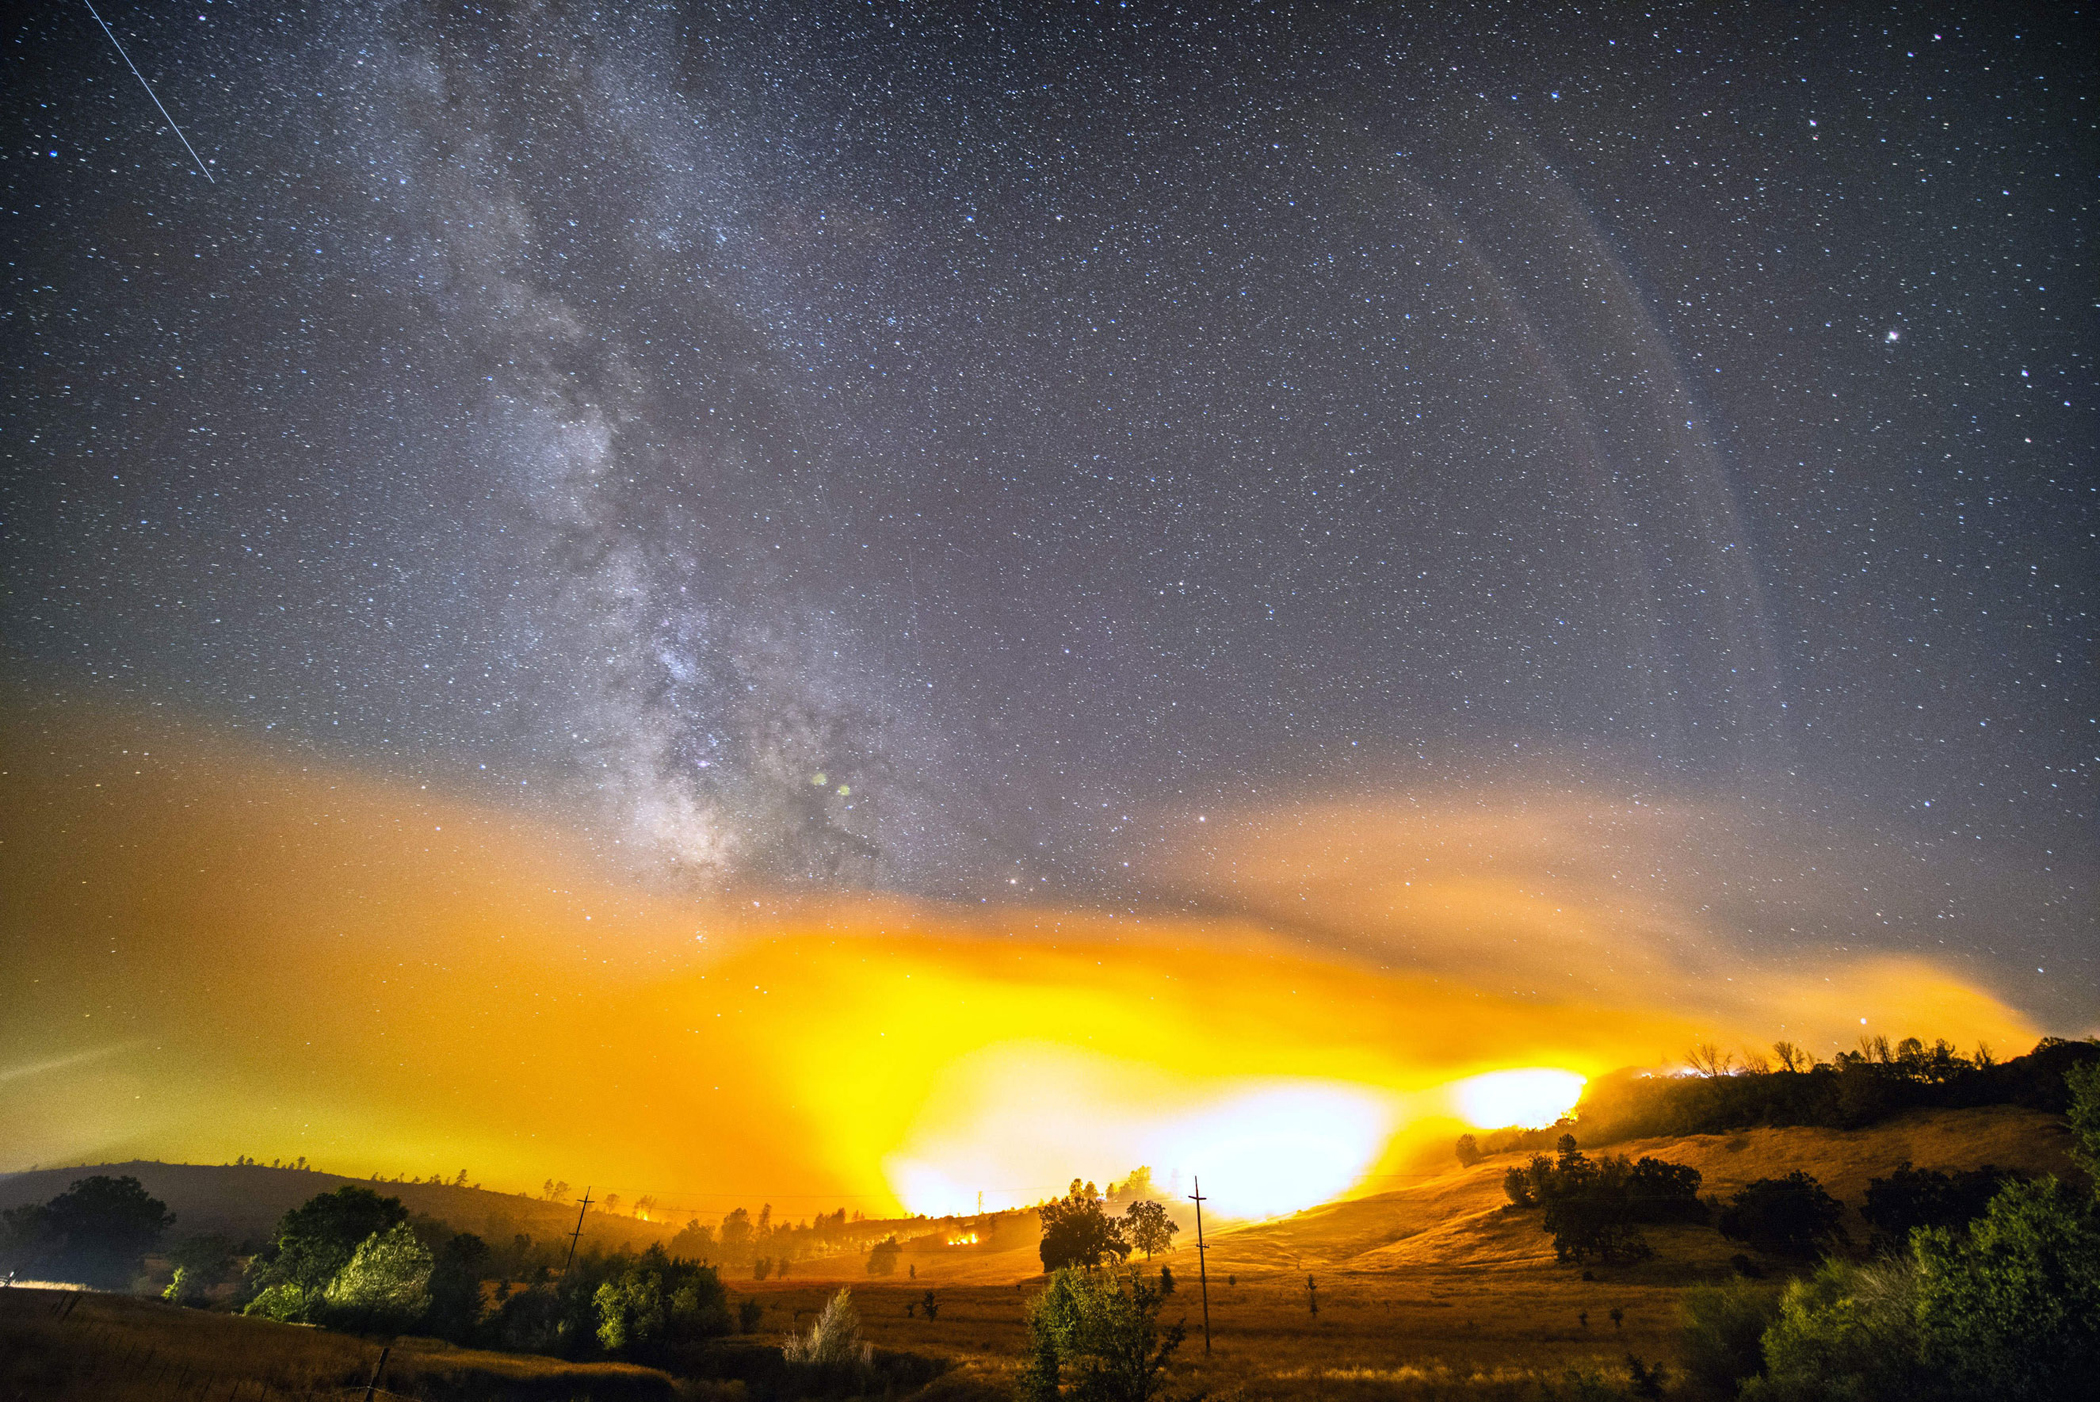 A meteor from the Perseid Meteor shower can be seen in the upper left corner in this long exposure image taken as a wildfire burned in Lake and Napa Counties near the town of Clearlake, Calif. on Aug. 12, 2015.